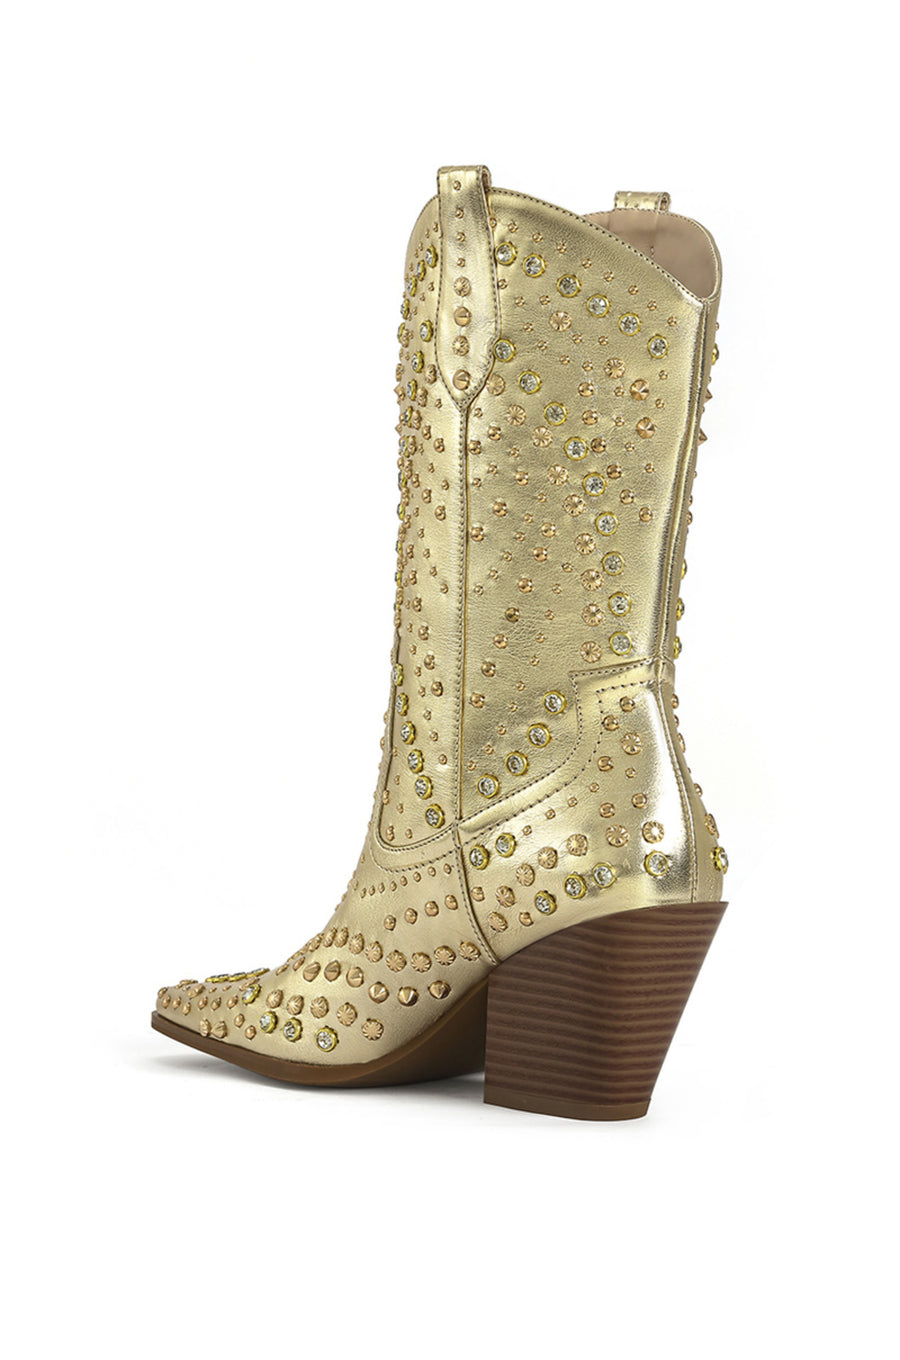 gold western inspired cowboy boot with studs and rhinestone embellishments